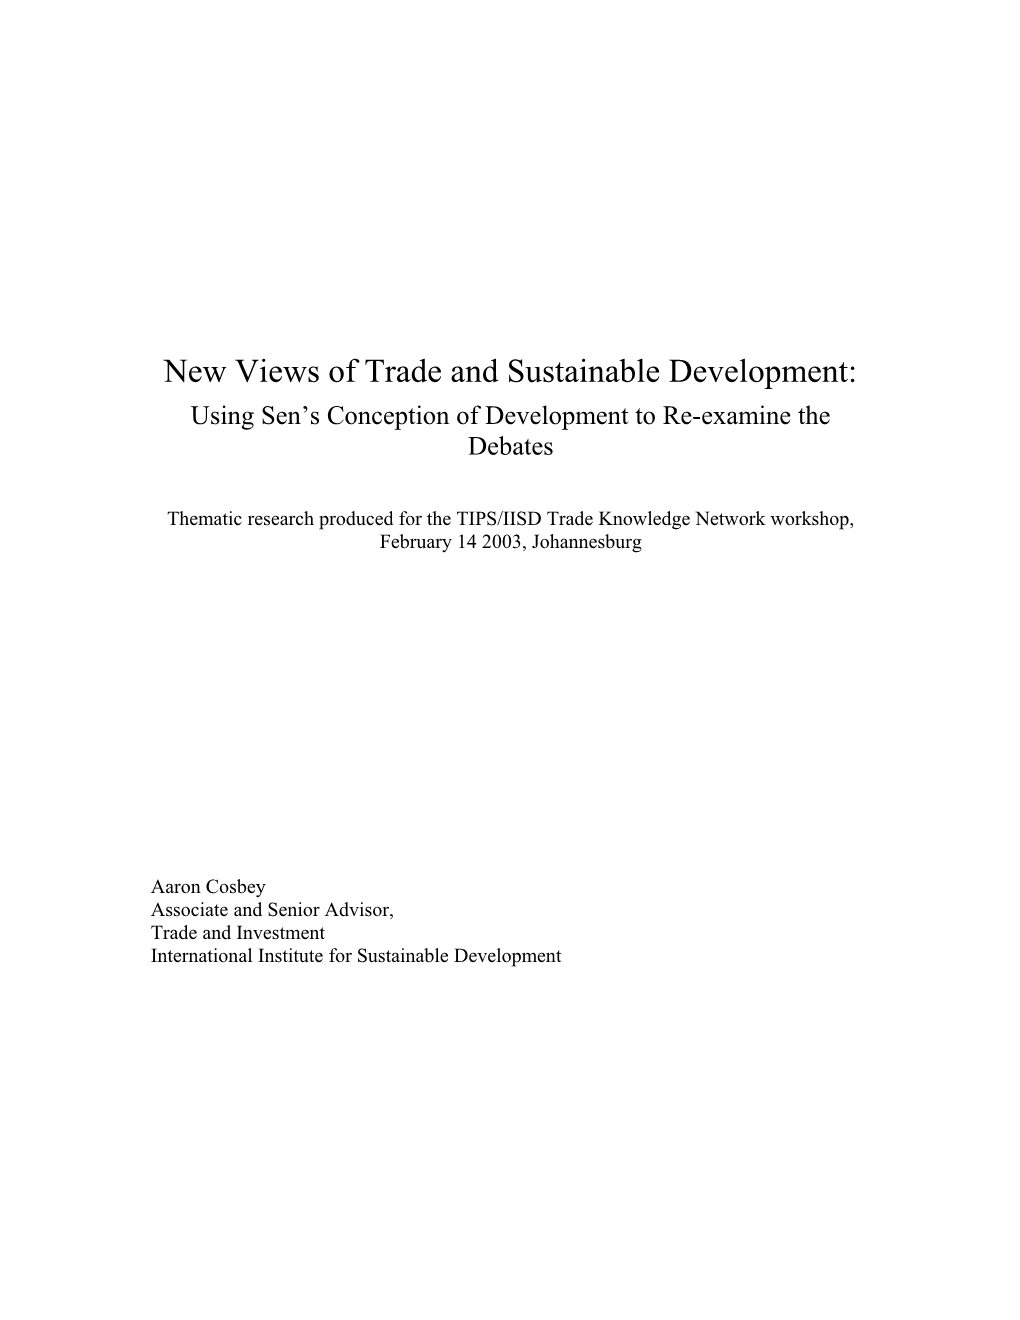 There Are Two Basic Modes of Conceiving the Trade-Environment Relationship, on Which Most